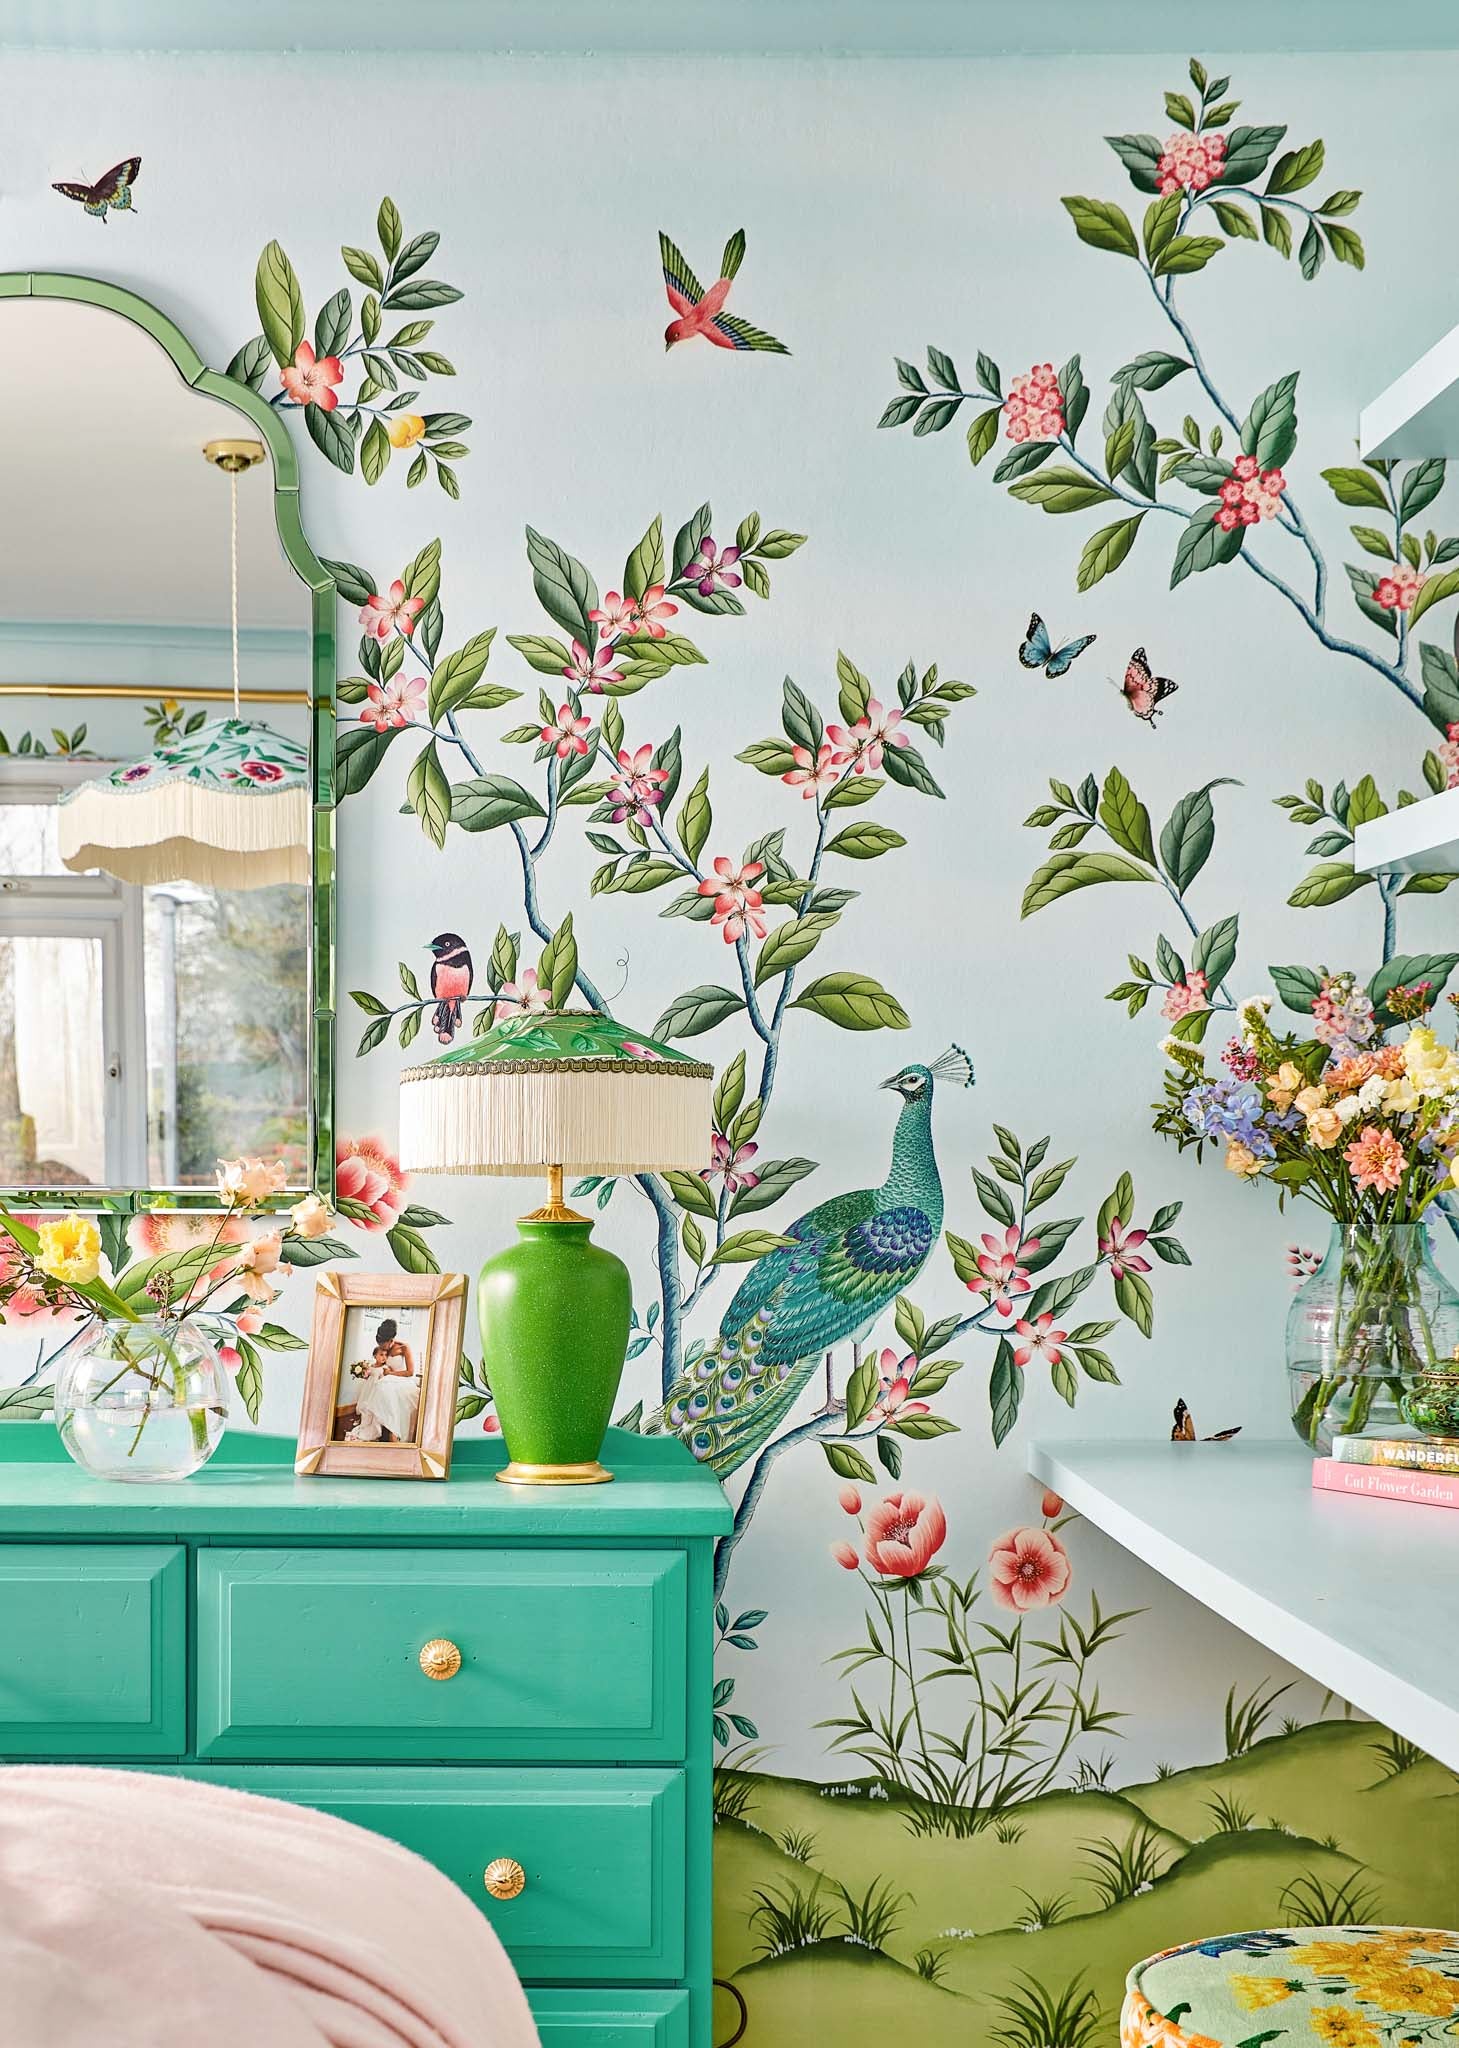 Aqua blue colourful bright floral scenic wallpaper mural with peacock birds and butterflies